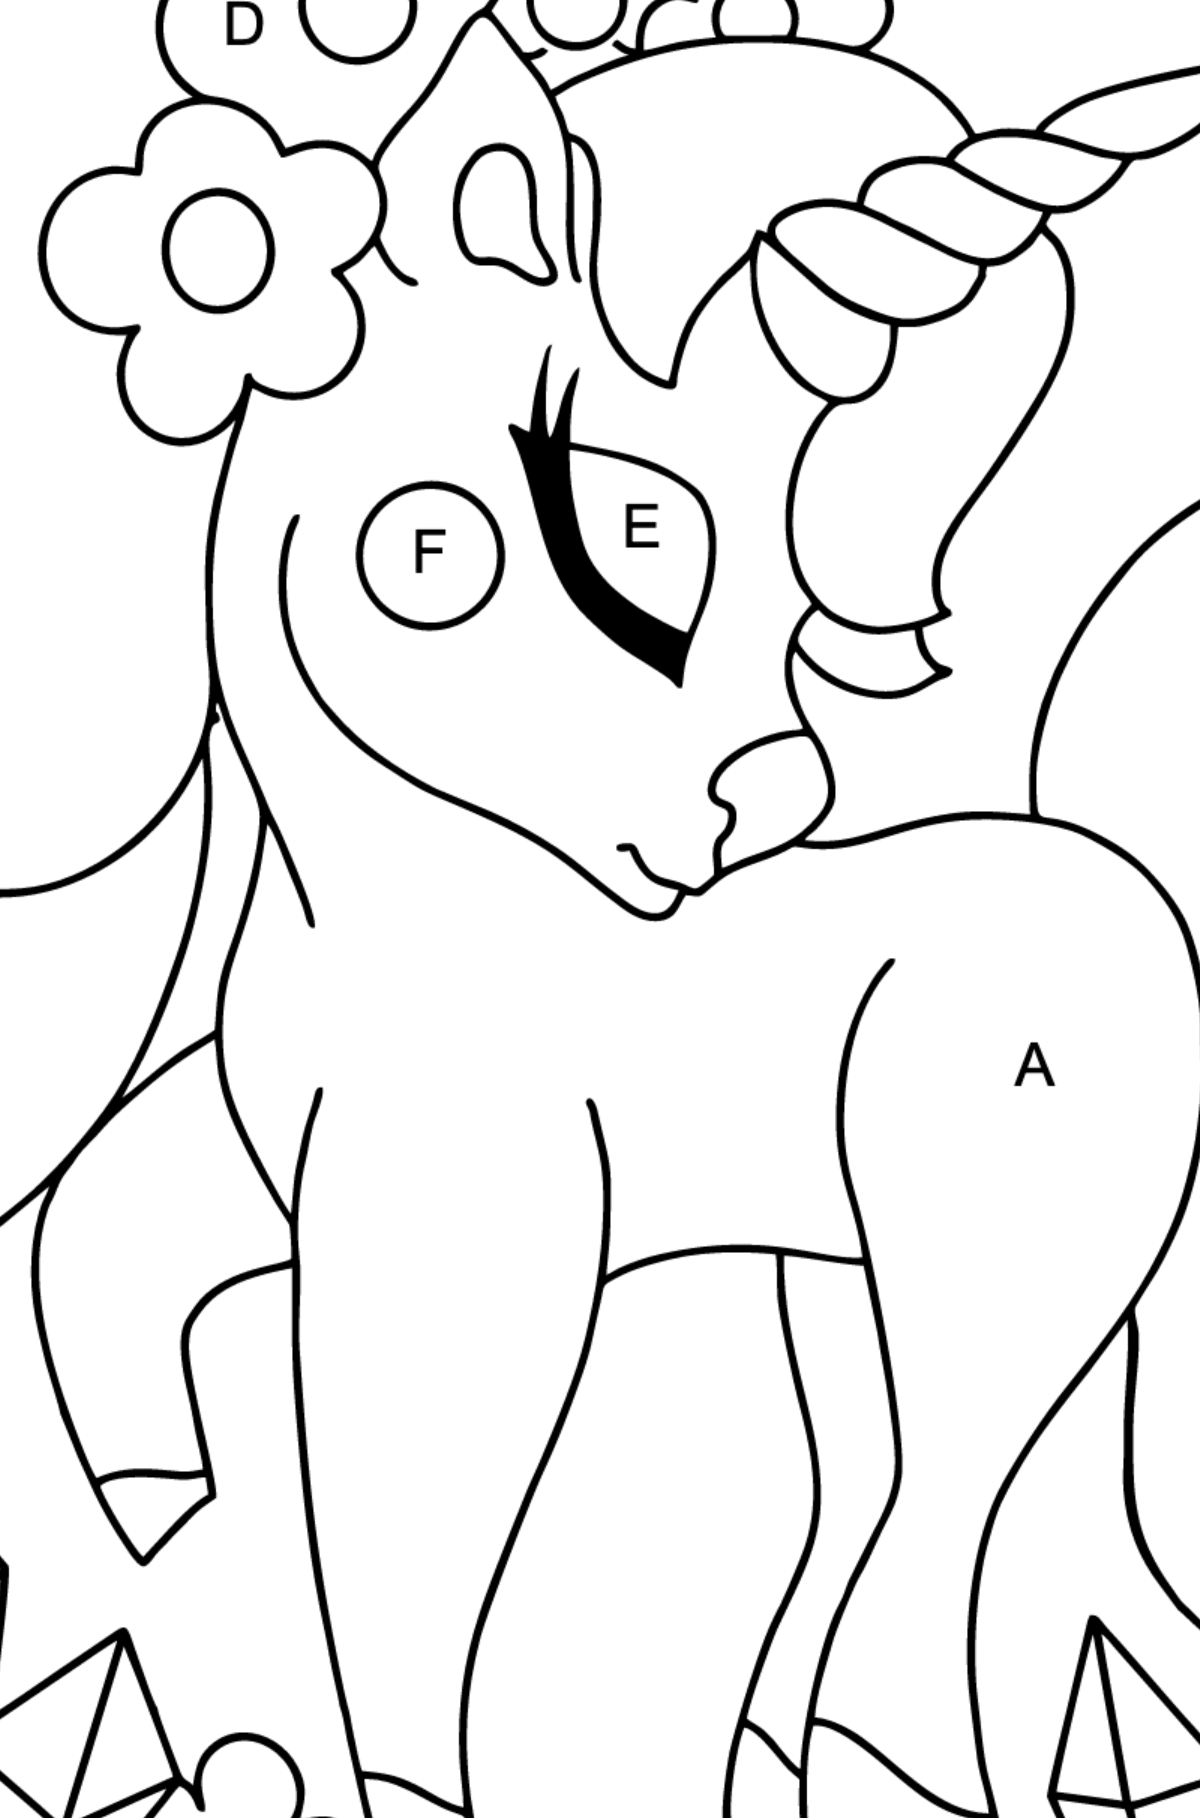 Simple Unicorn Coloring Book for Kids - Coloring by Letters for Kids